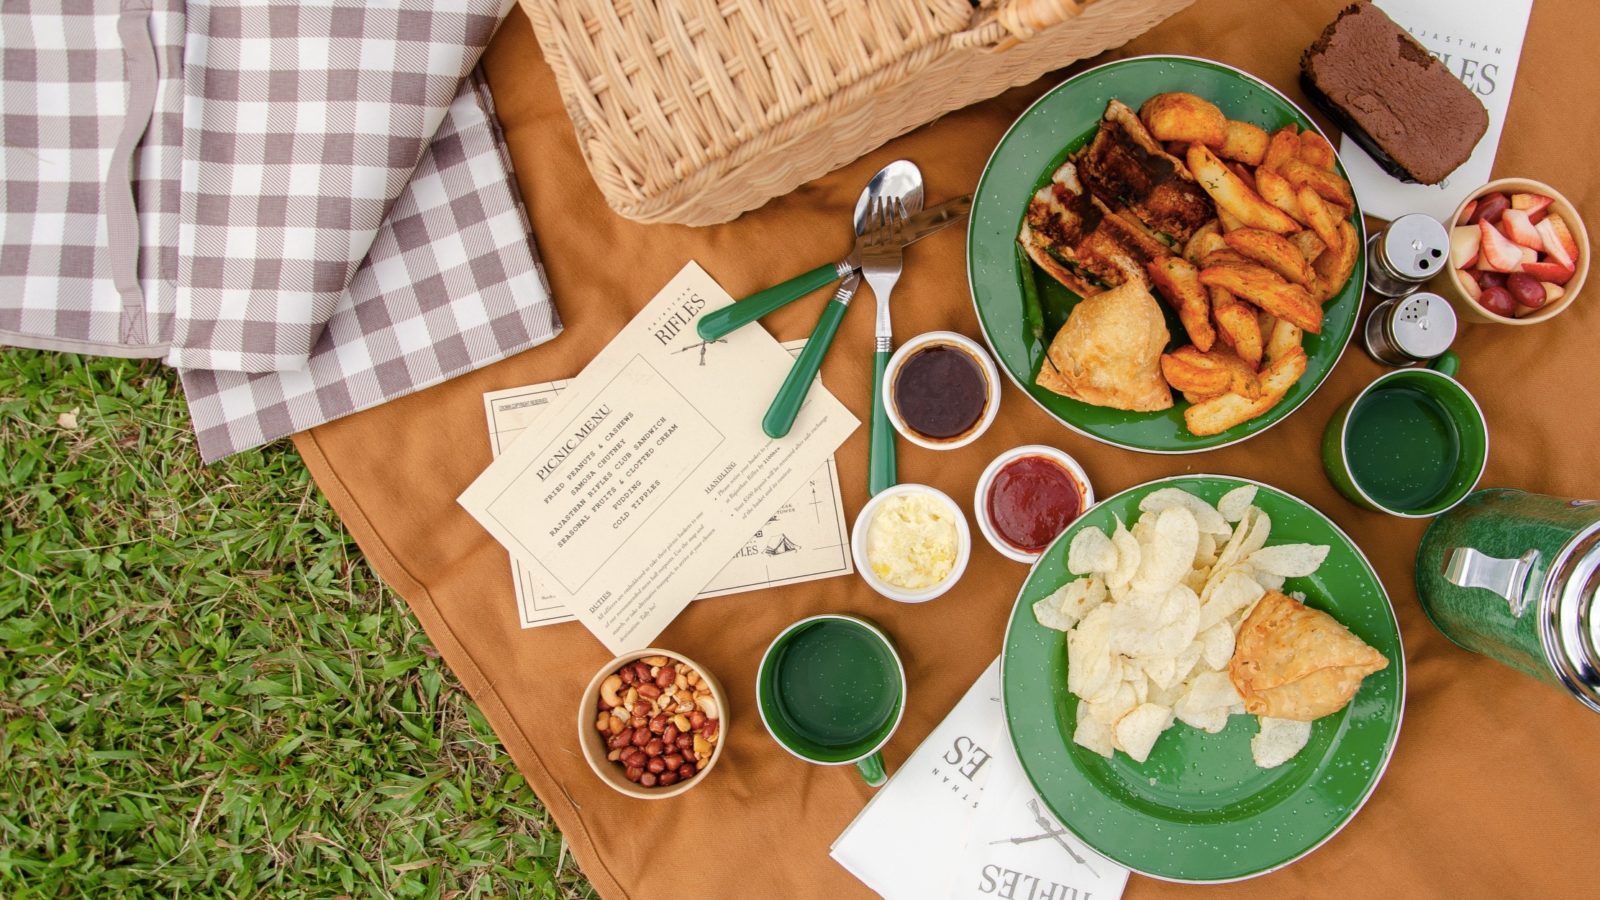 Gone Picnicking: Where to find the best spreads for your next afternoon picnic